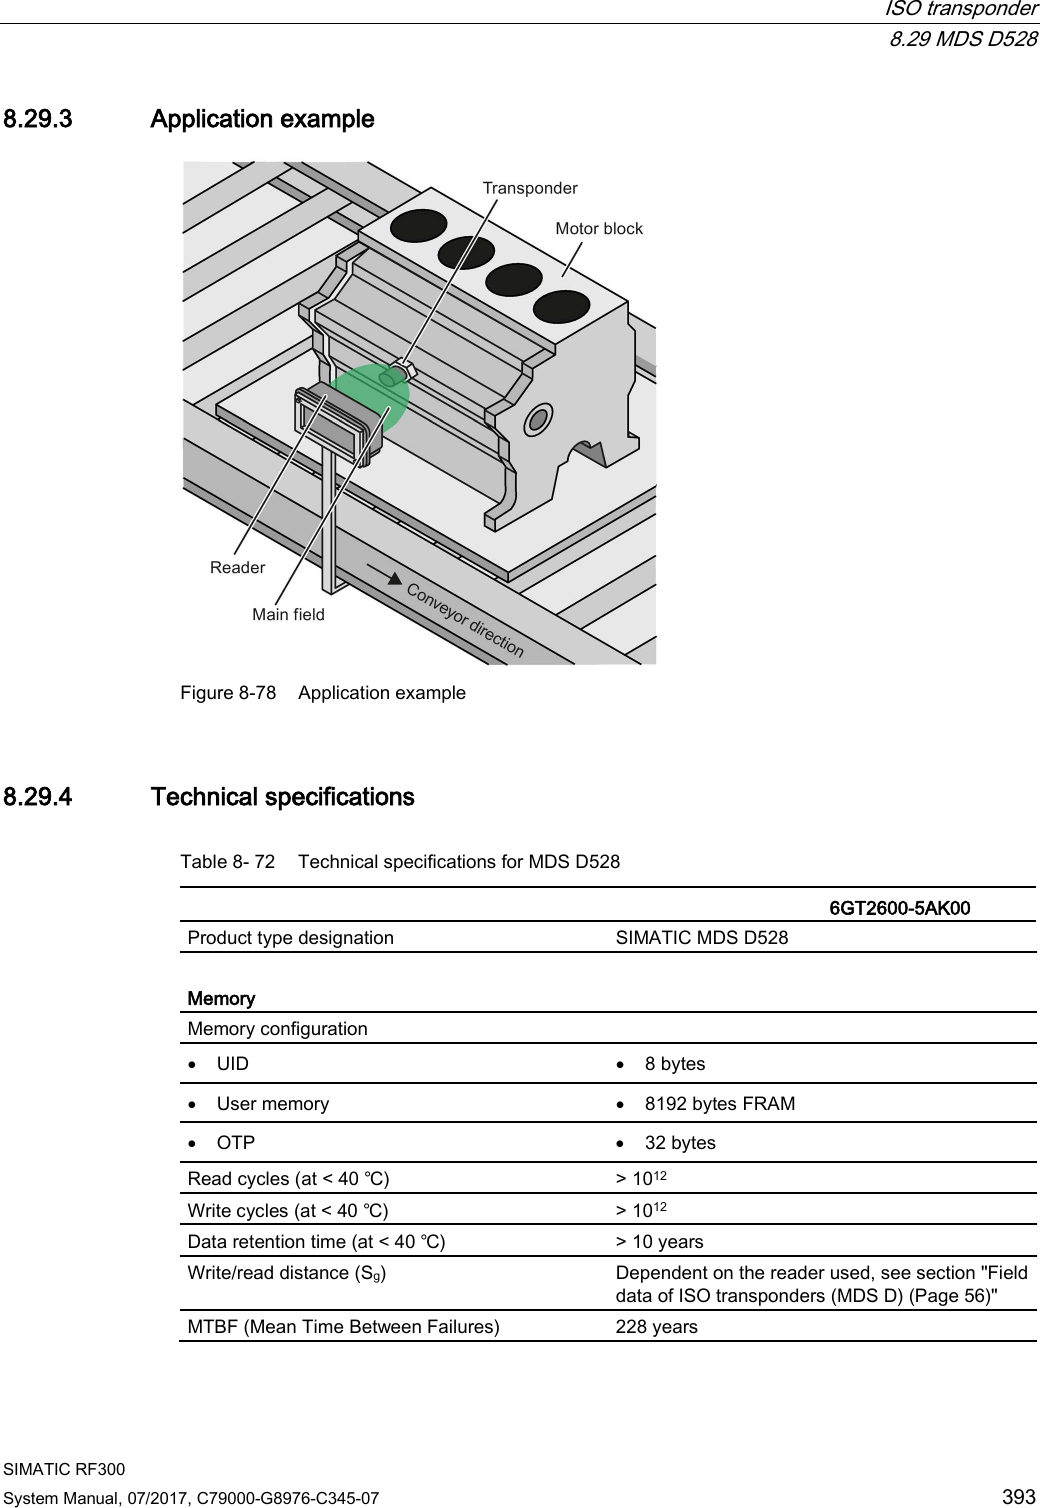  ISO transponder  8.29 MDS D528 SIMATIC RF300 System Manual, 07/2017, C79000-G8976-C345-07 393 8.29.3 Application example  Figure 8-78 Application example 8.29.4 Technical specifications Table 8- 72 Technical specifications for MDS D528    6GT2600-5AK00  Product type designation SIMATIC MDS D528  Memory Memory configuration   • UID • 8 bytes • User memory • 8192 bytes FRAM • OTP • 32 bytes Read cycles (at &lt; 40 ℃) &gt; 1012 Write cycles (at &lt; 40 ℃) &gt; 1012 Data retention time (at &lt; 40 ℃) &gt; 10 years Write/read distance (Sg)  Dependent on the reader used, see section &quot;Field data of ISO transponders (MDS D) (Page 56)&quot; MTBF (Mean Time Between Failures) 228 years 